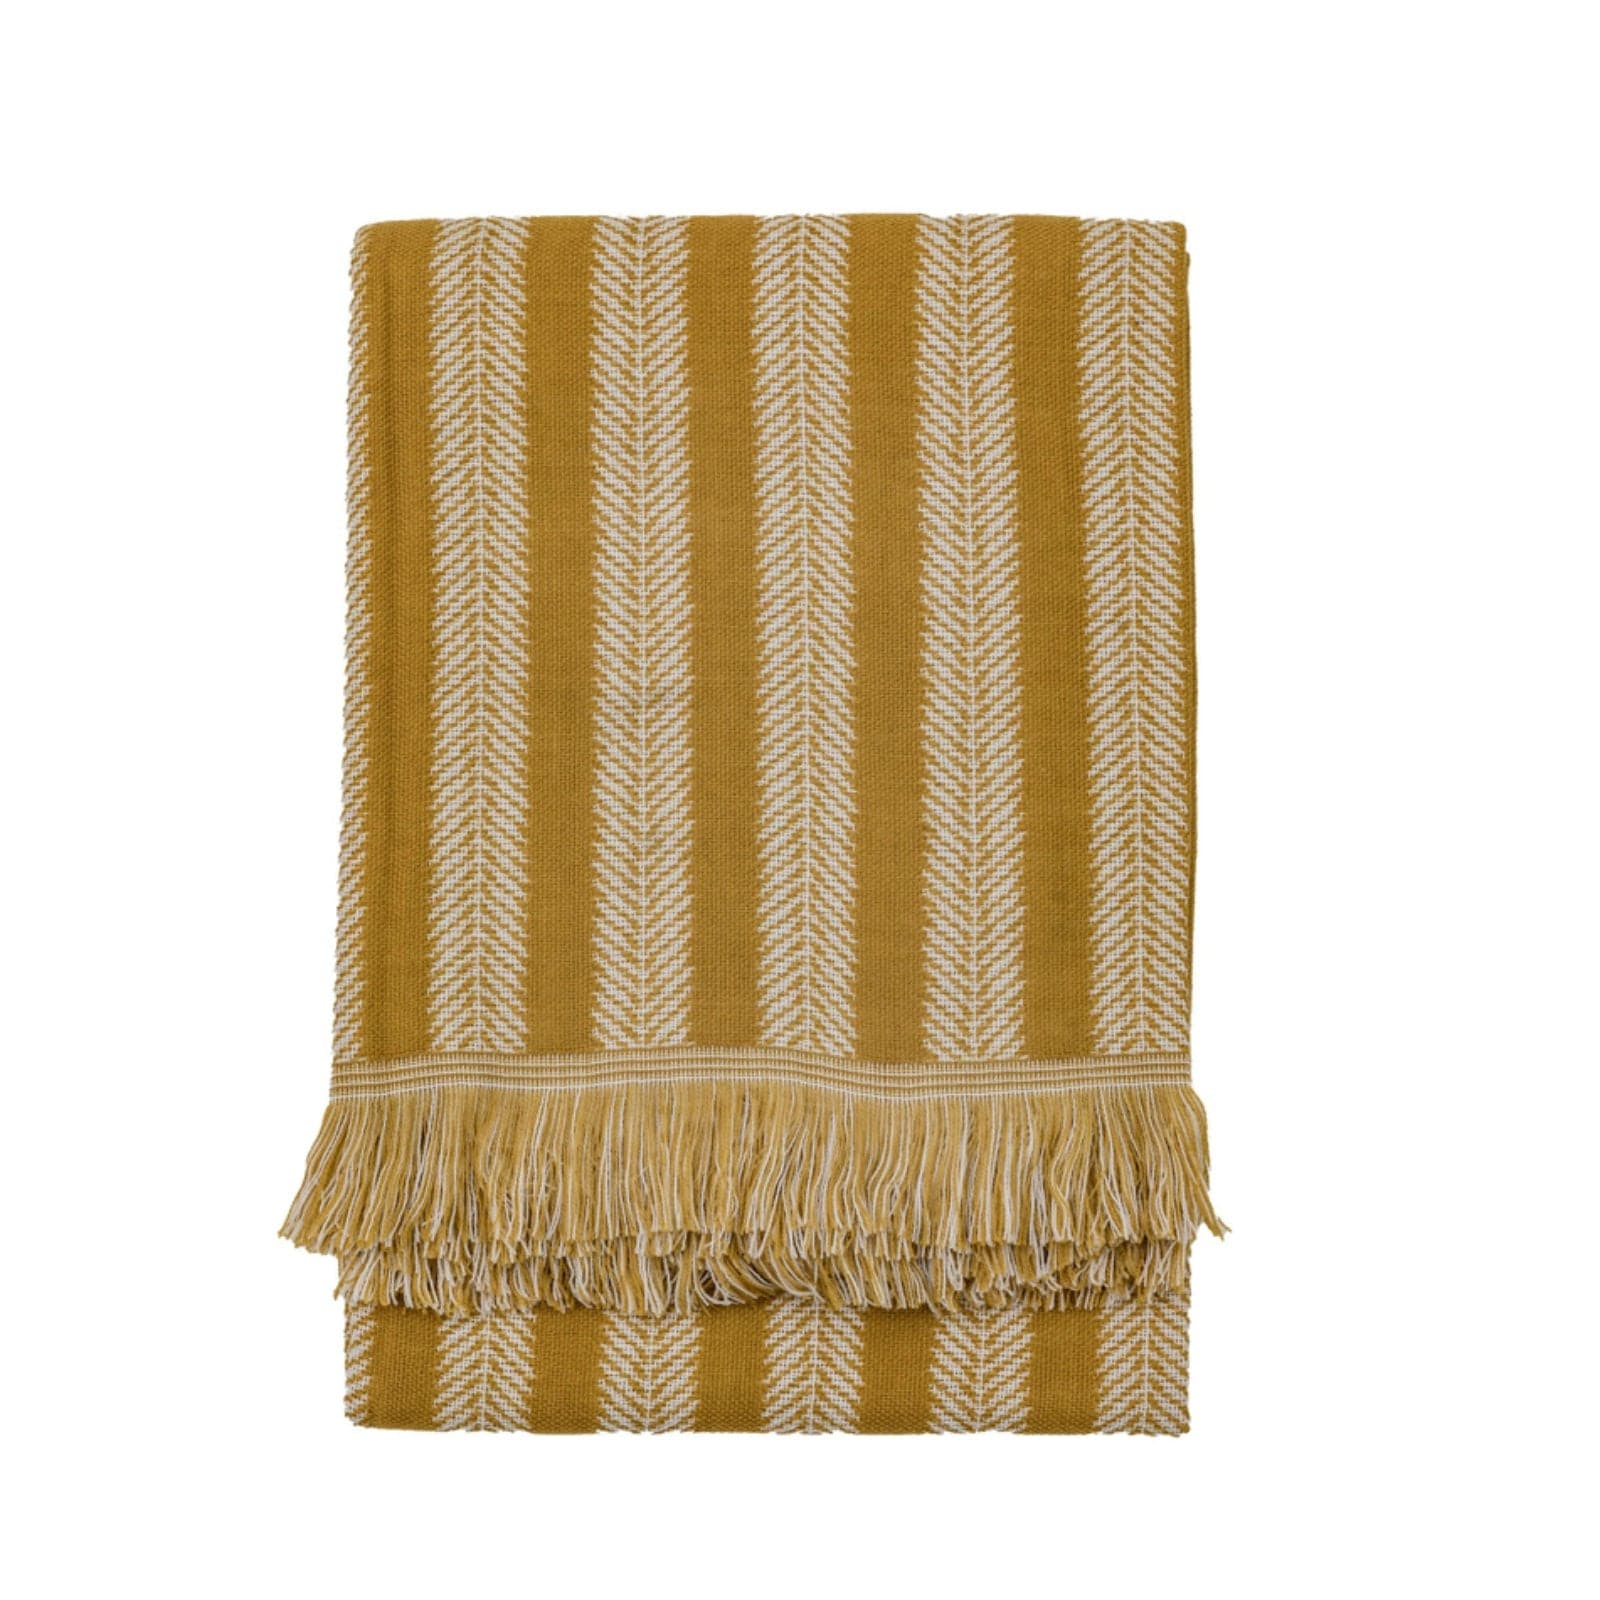 Woven Fishbone Patterned Fringed Ochre Throw - The Farthing